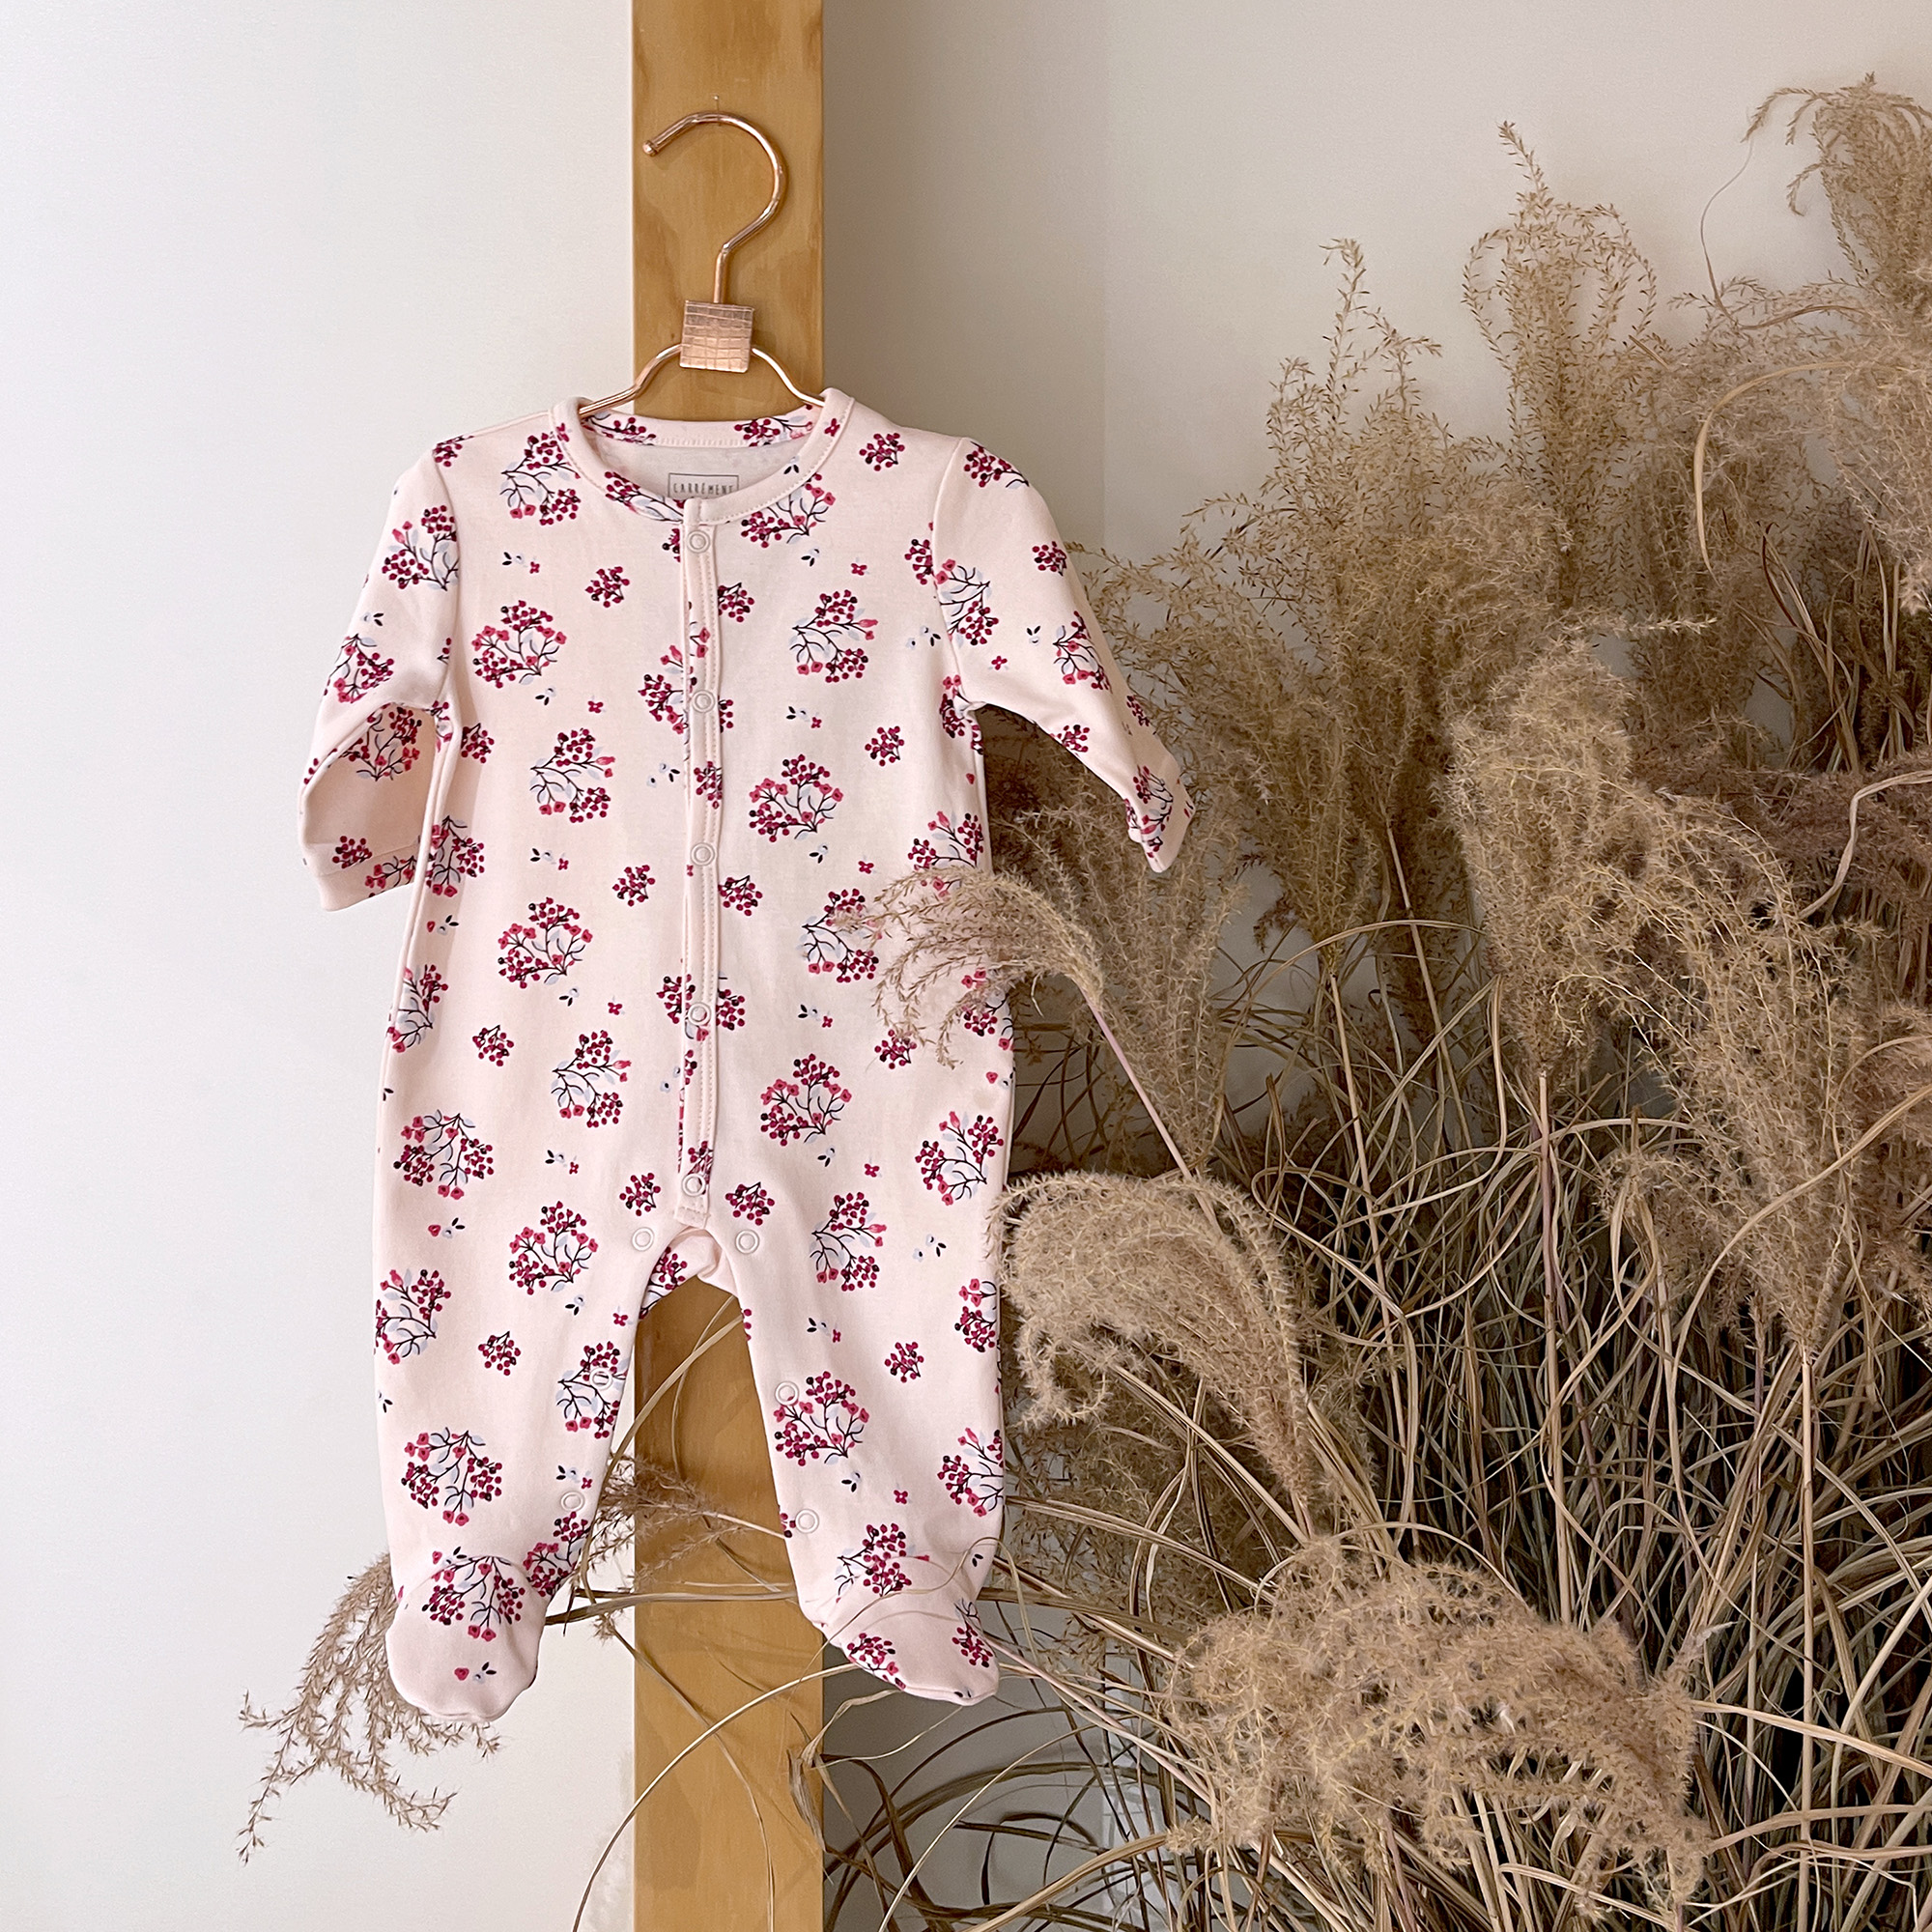 Patterned One-Piece Pajamas CARREMENT BEAU for GIRL